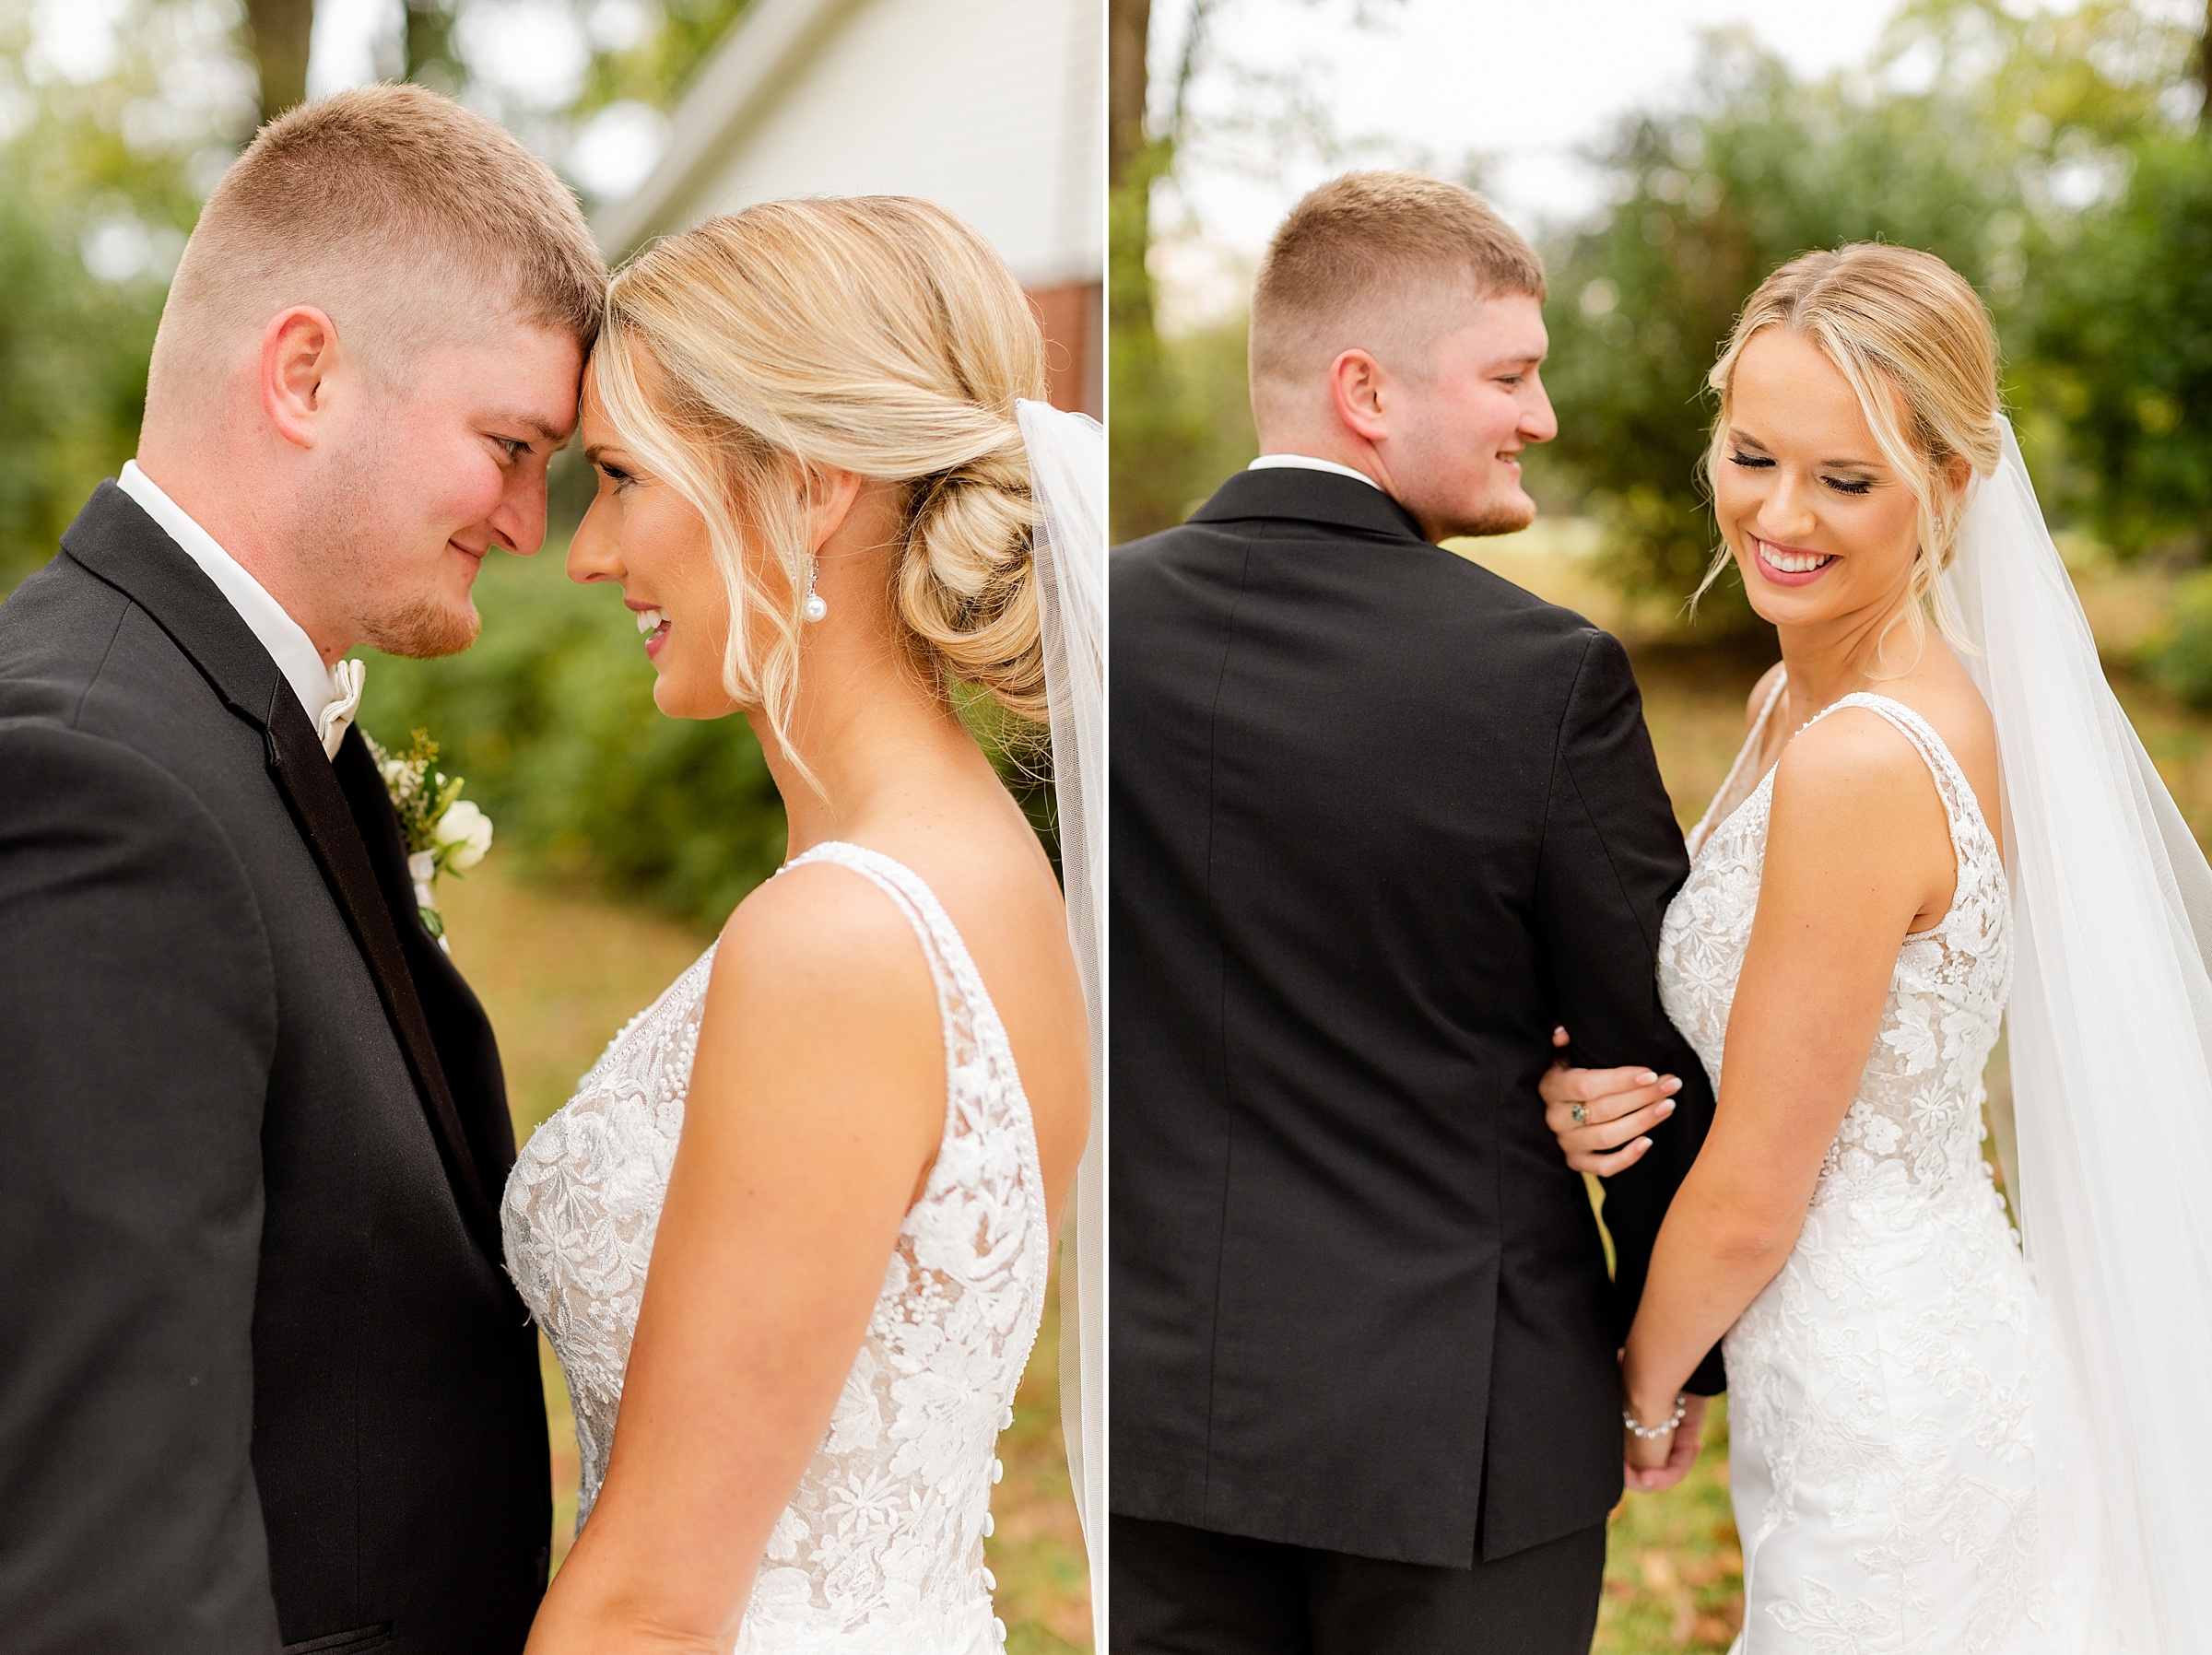 Hannah and Cody's Wedding in Booneville, IN079.jpg